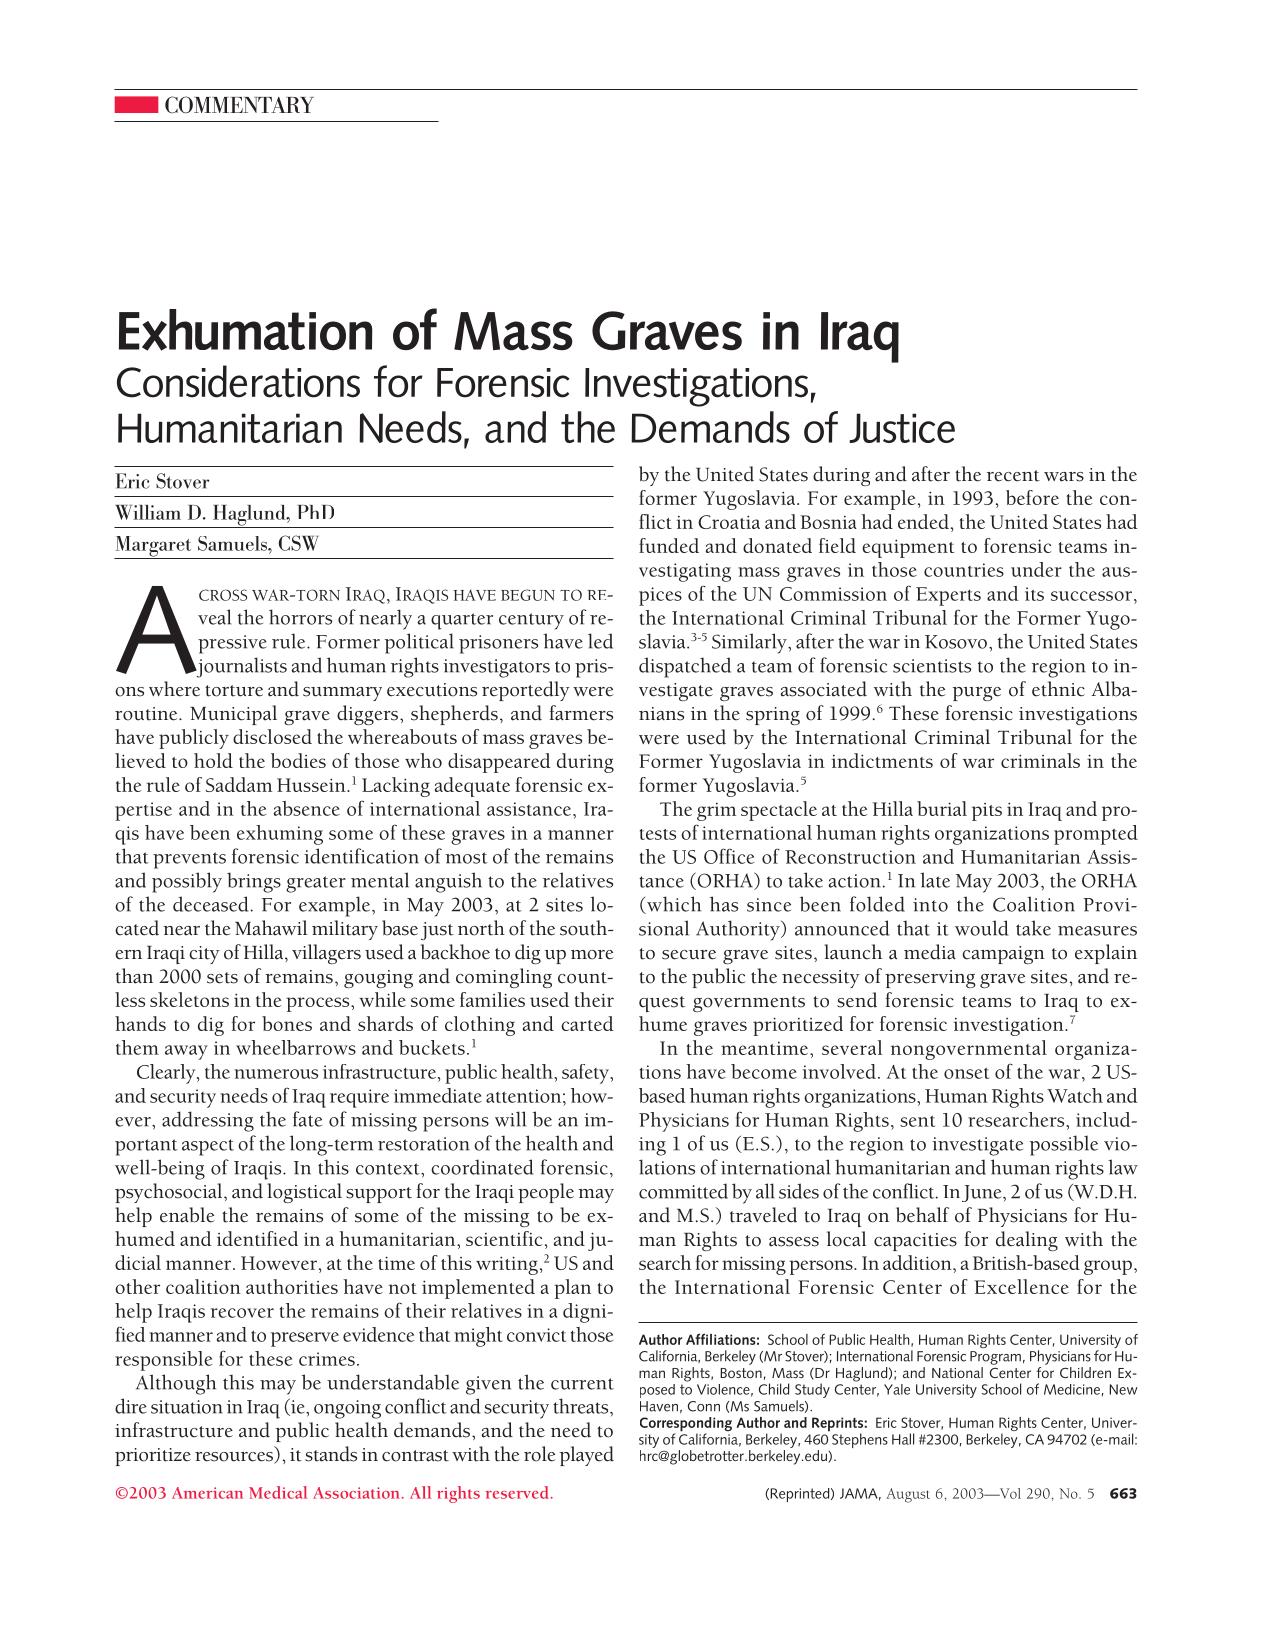 Exhumation of Mass Graves in Iraq